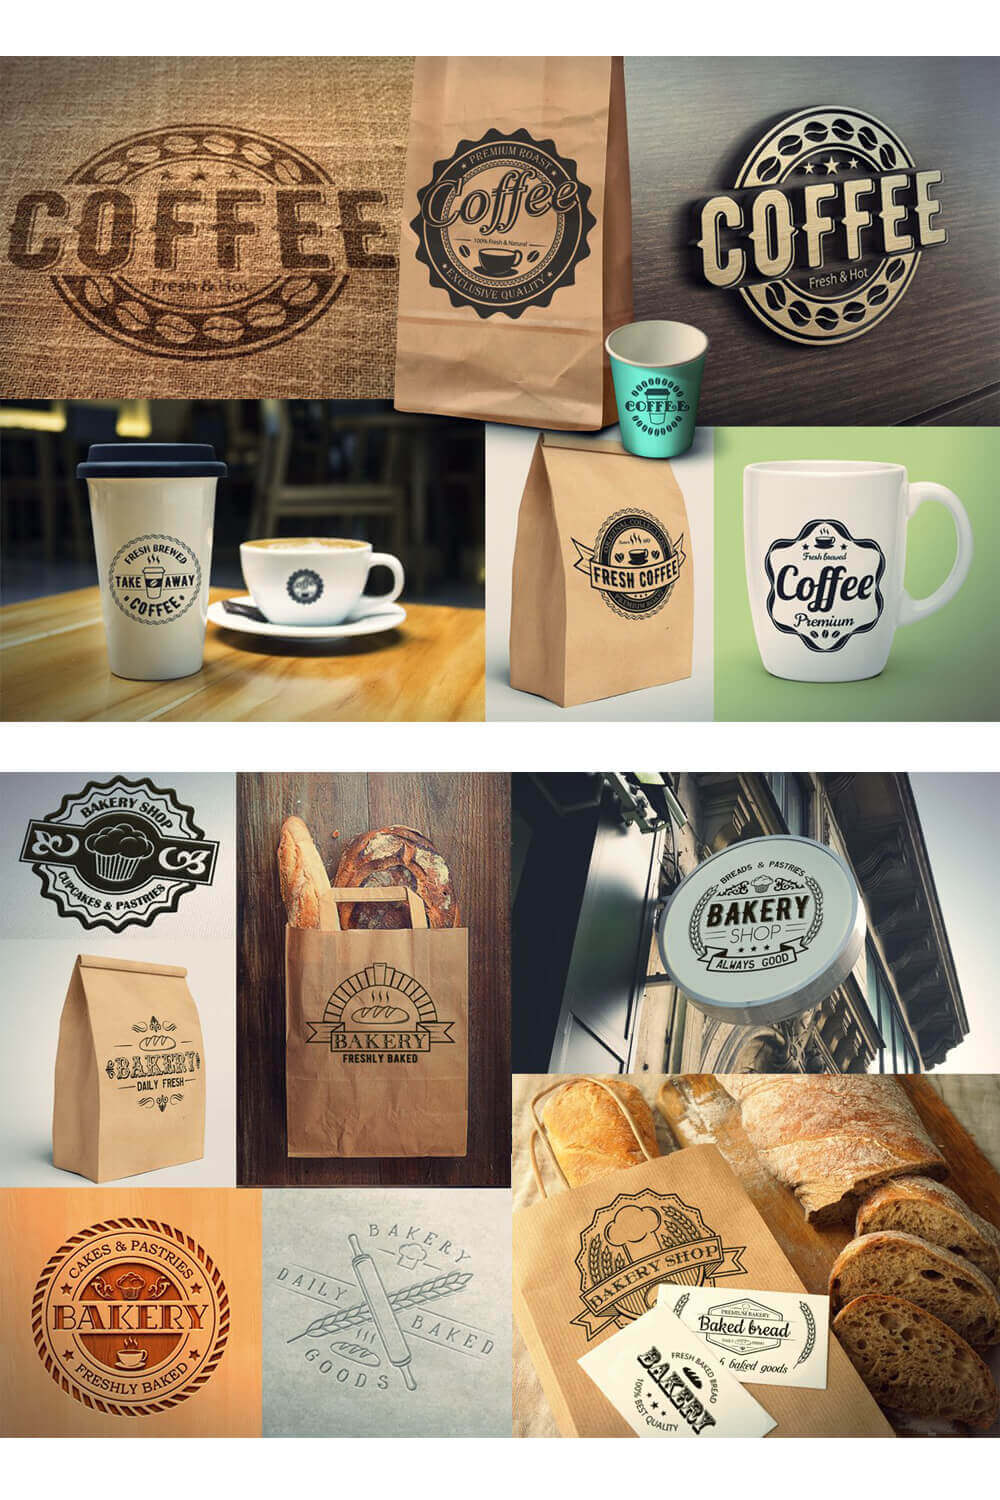 Three coffee logos, many variations of the bakery logo on different objects and signs.